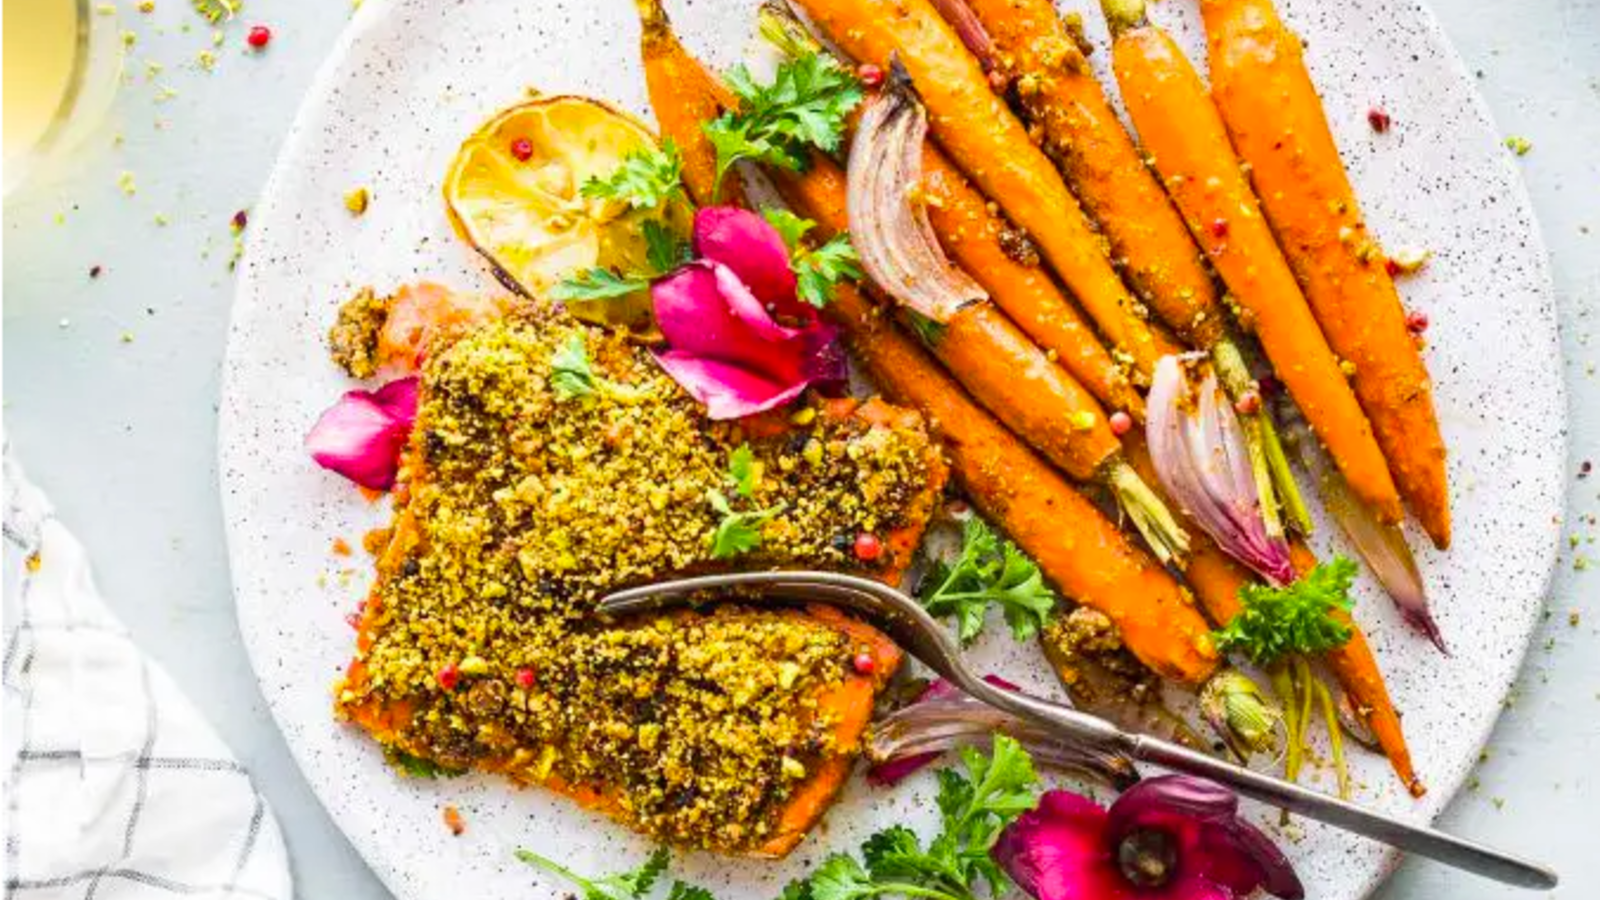 Image of Sheet Pan Pistachio Crusted Salmon with Glazed Carrots